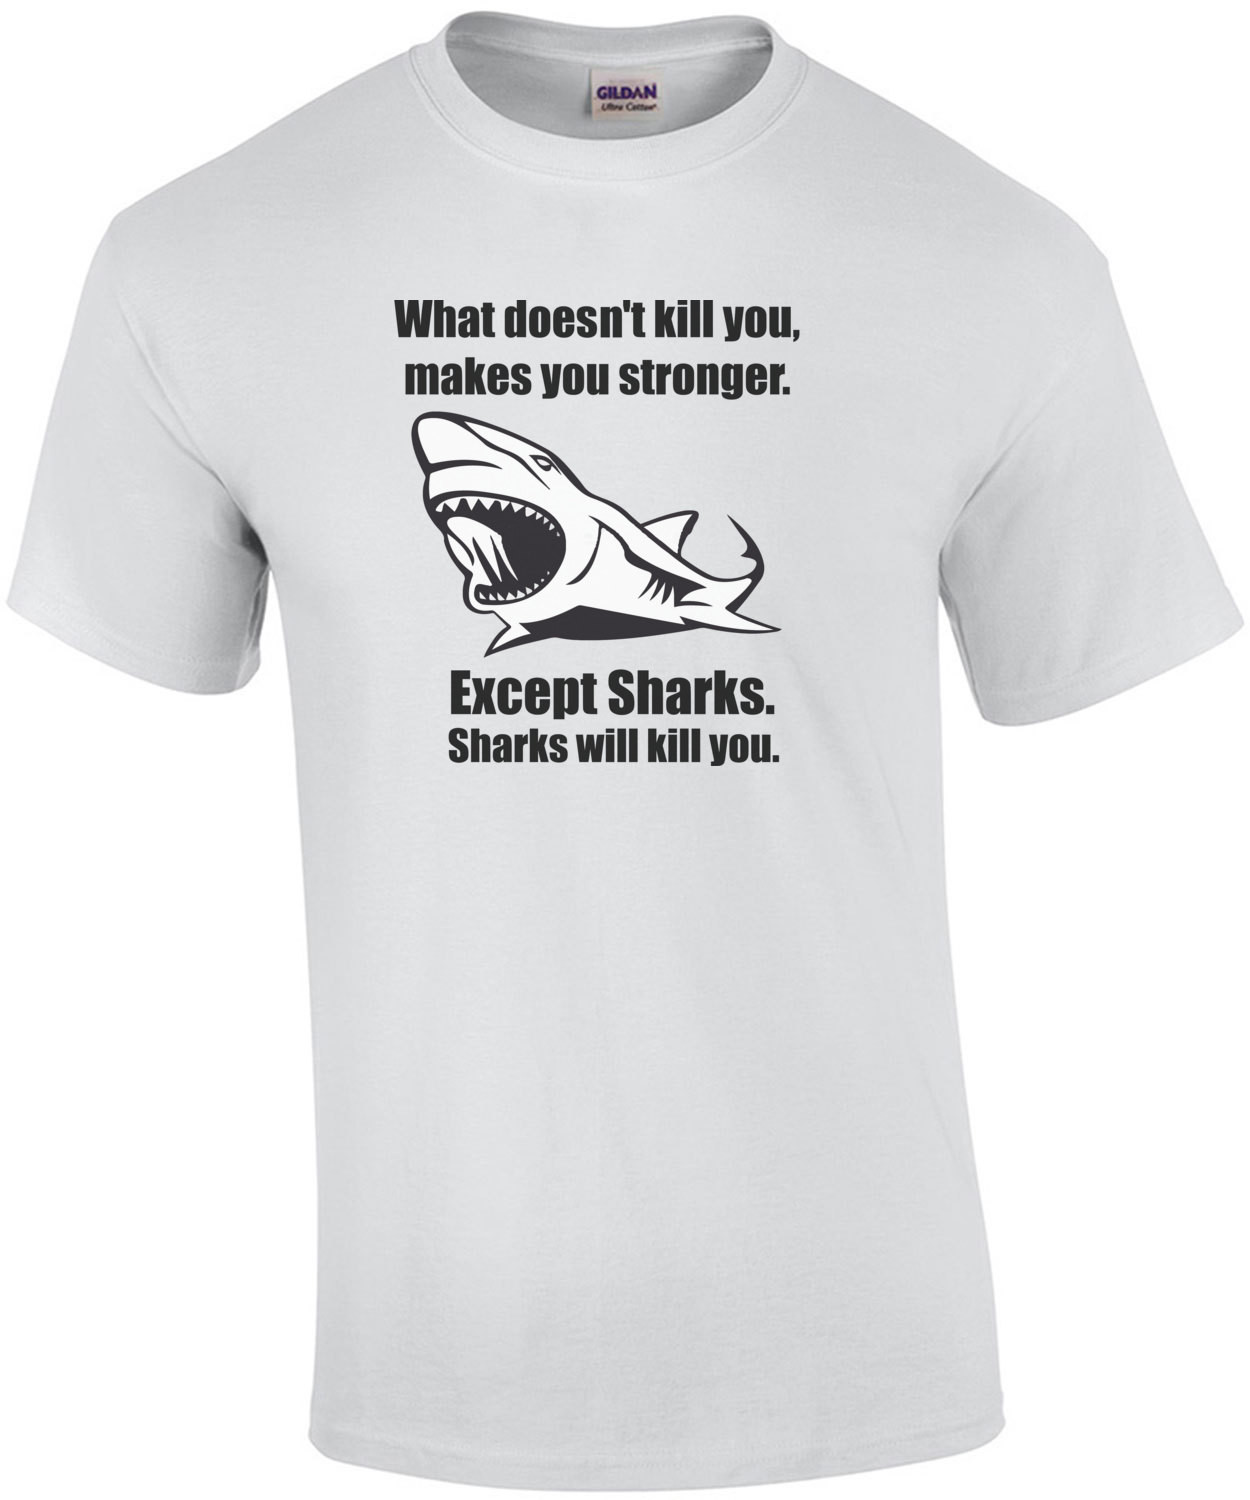 What doesn't kill you makes you stronger. Except for sharks. Funny